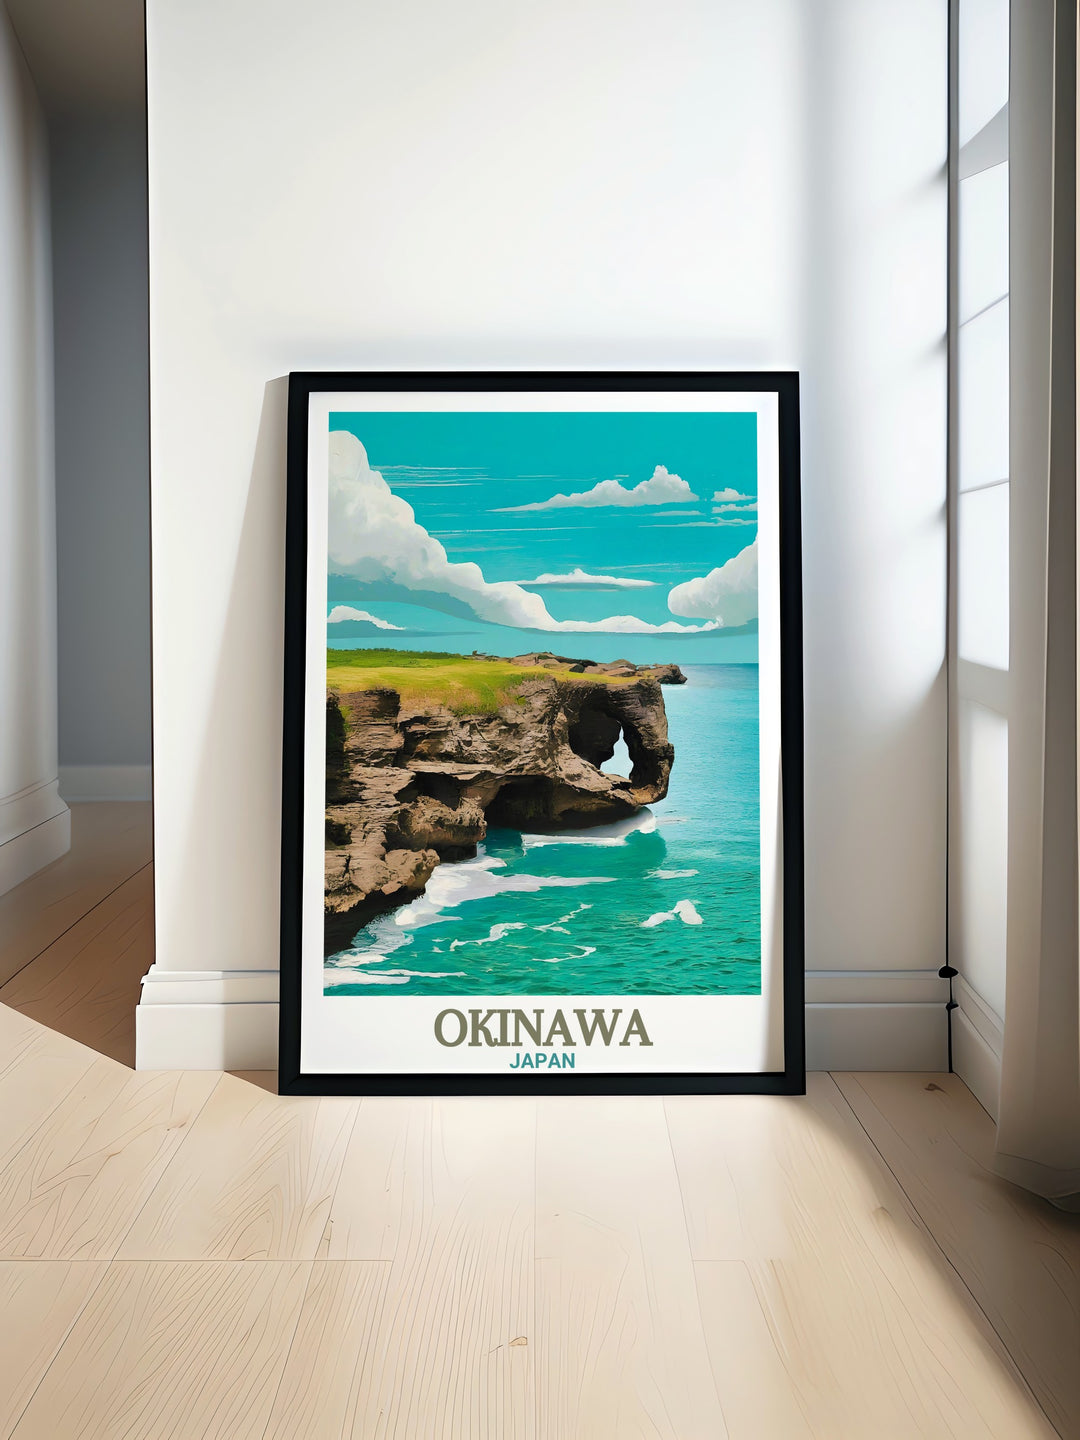 Cape Manzamo travel poster featuring the stunning cliffs and ocean views of Okinawa perfect for enhancing any living space with beautiful Okinawa decor and bringing a touch of Japanese scenery into your home